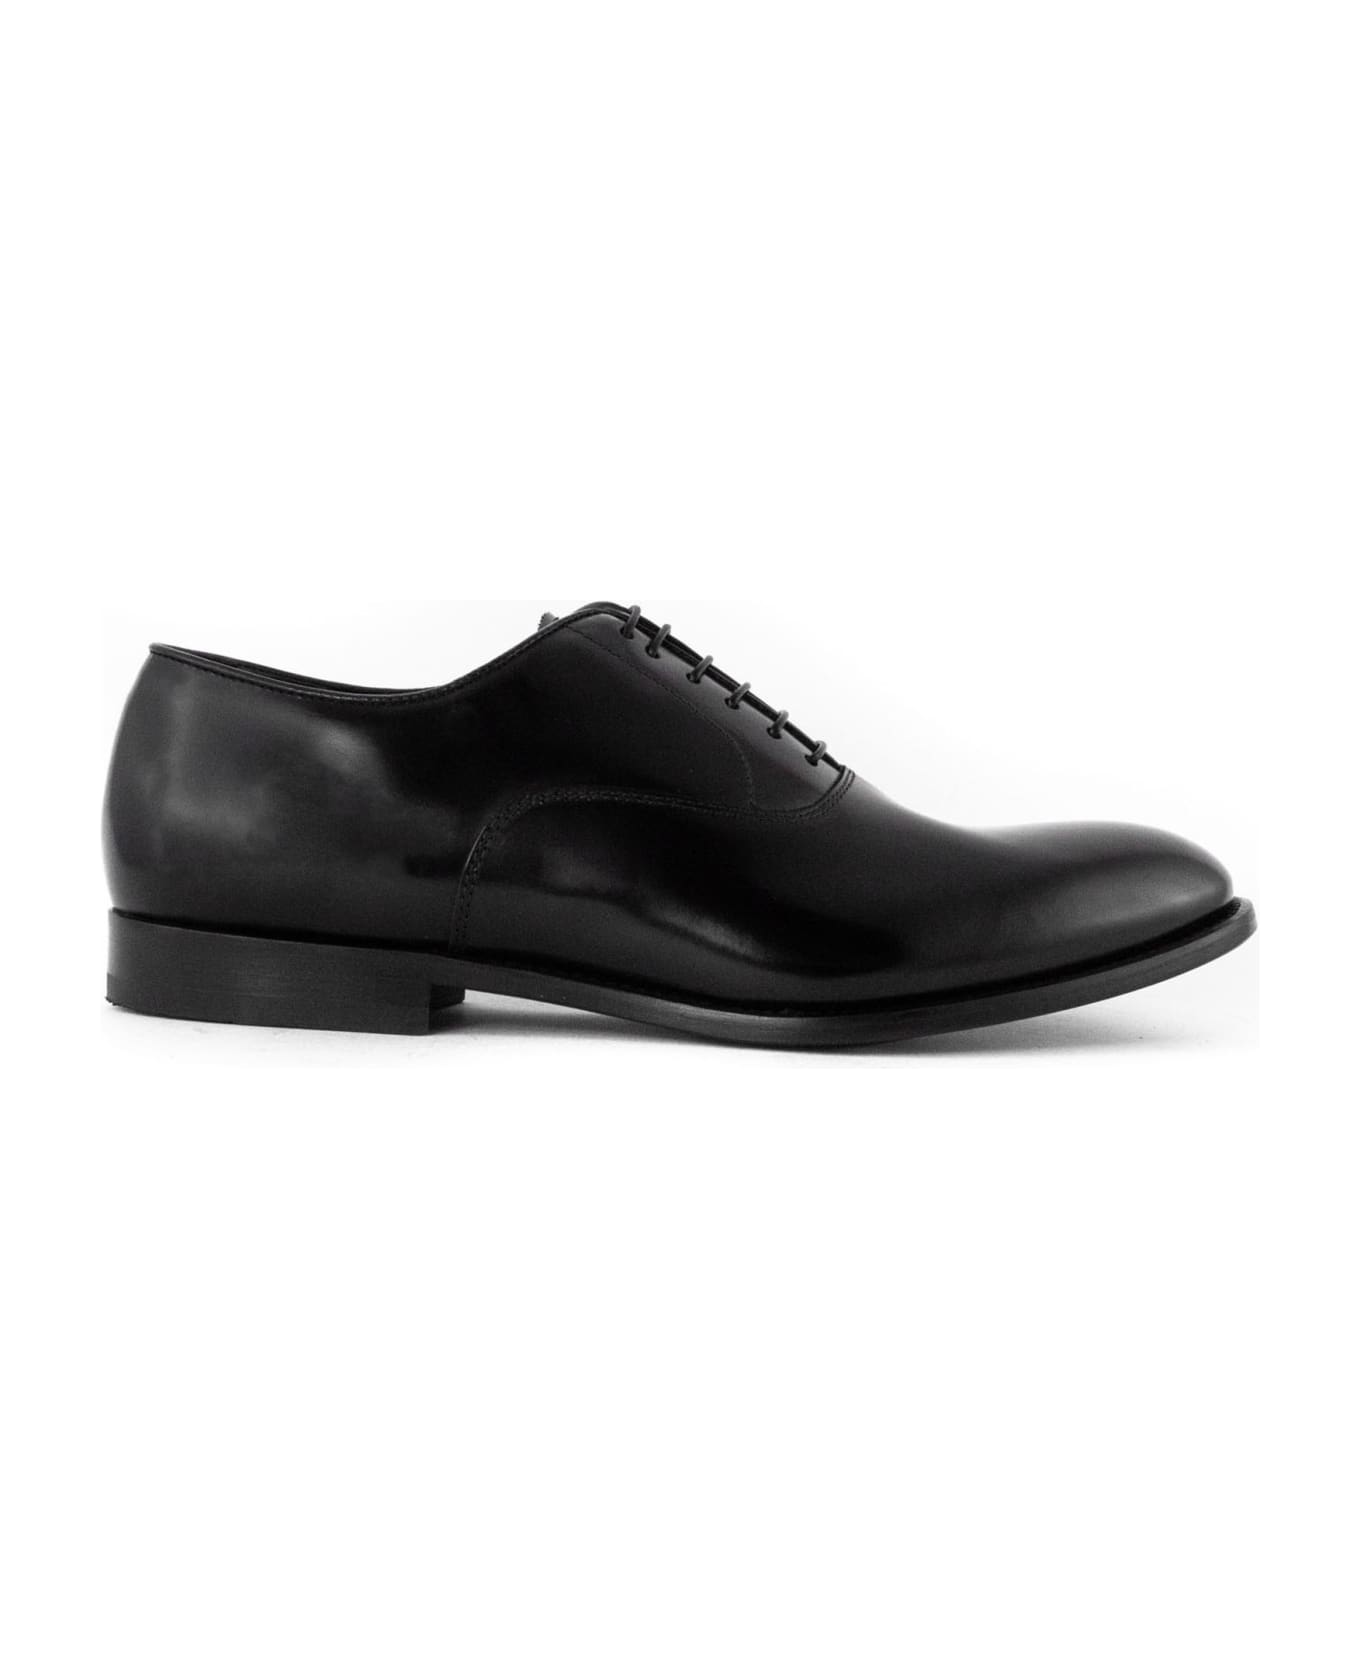 Doucal's Oxford Black Leather Laced Shoes - Black ローファー＆デッキシューズ